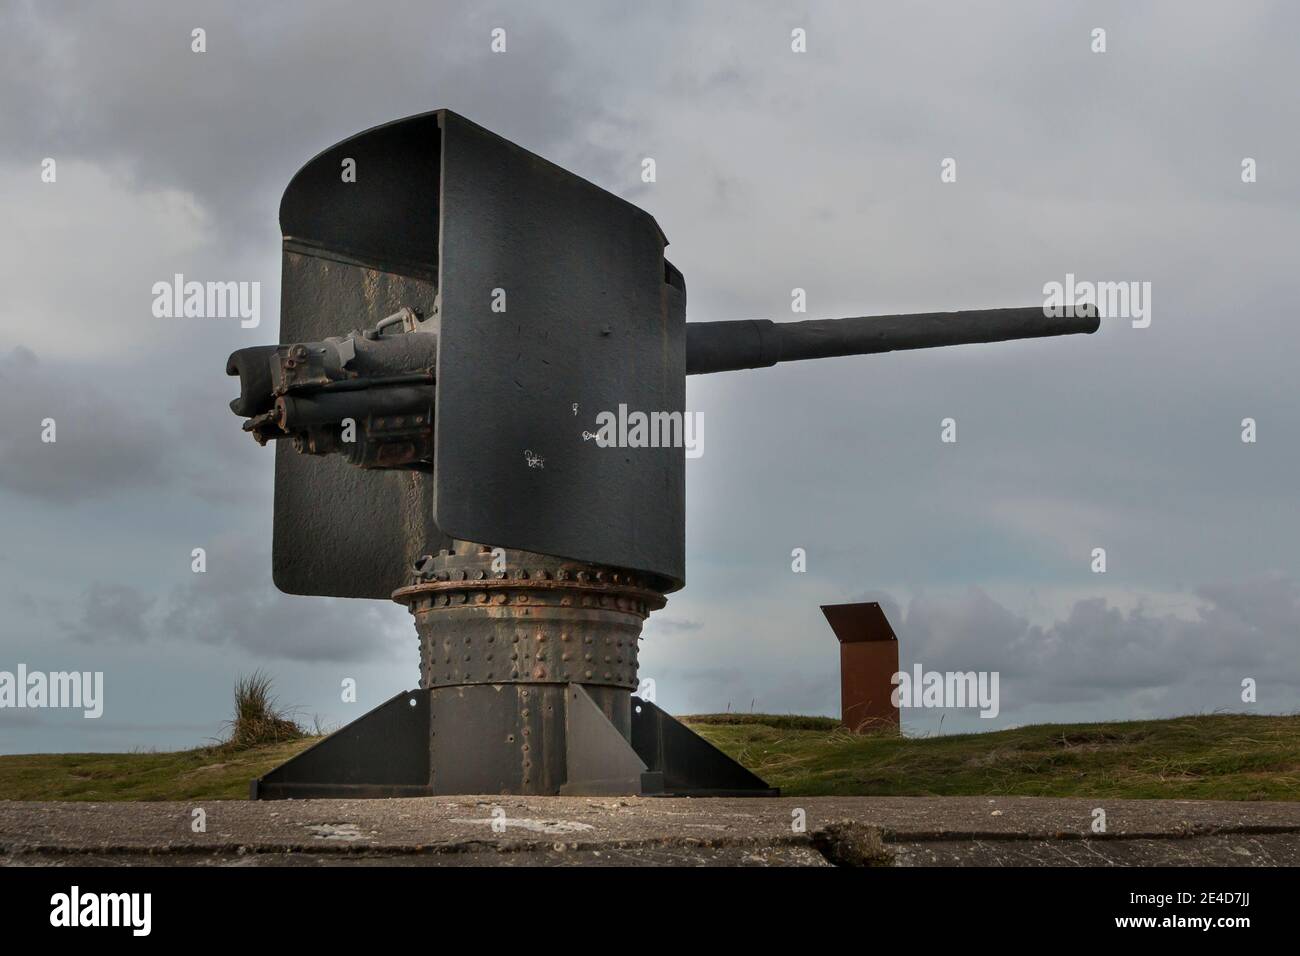 Thyboron, Denmark - 23 October 2020: Old German cannons that can be seen at the port of Thyboron, The cannons have been on German warships during Worl Stock Photo